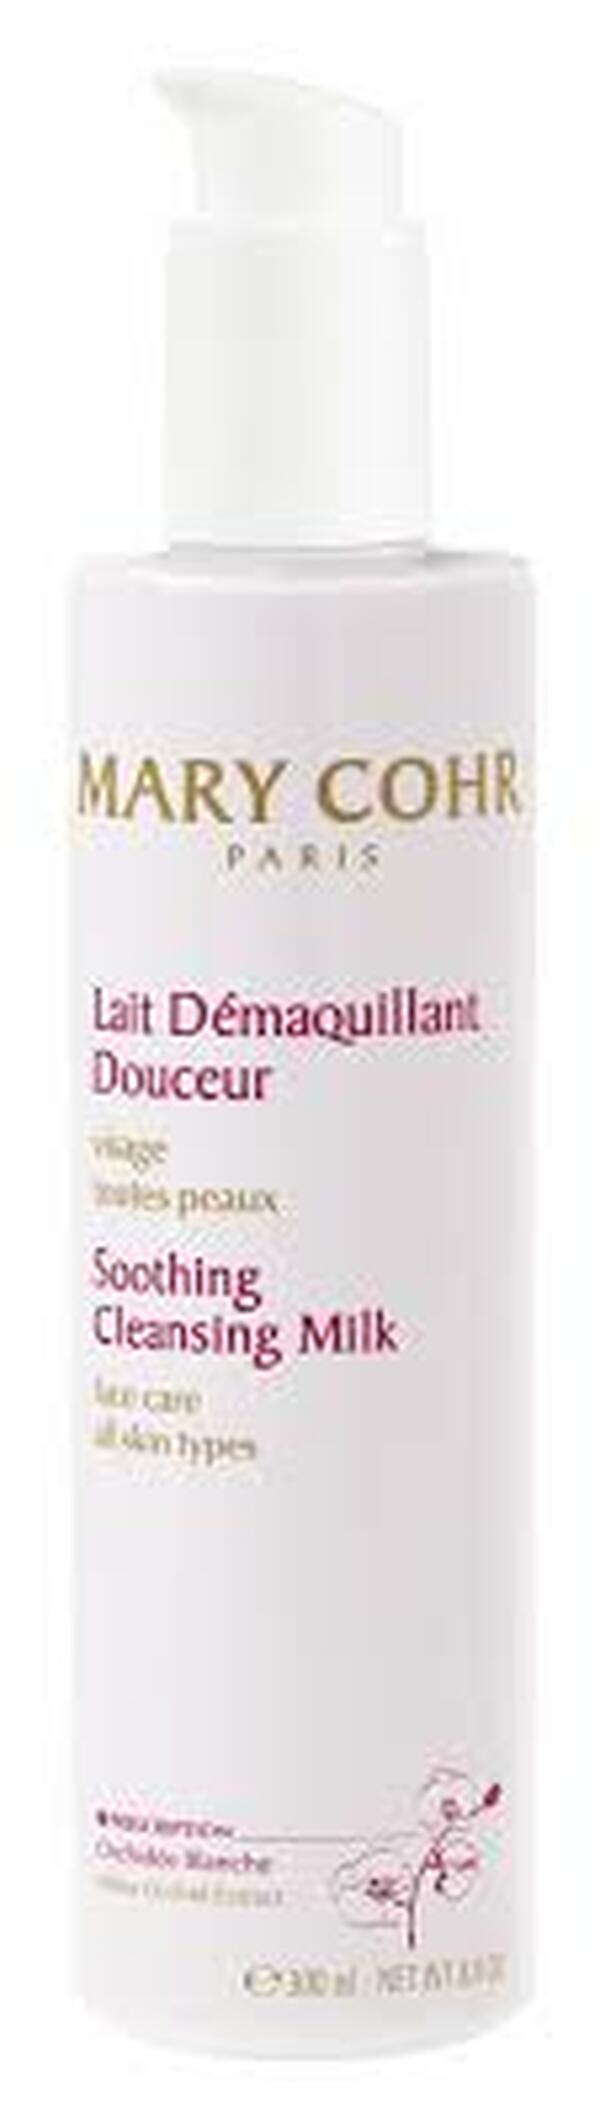 MARY COHR Soothing Cleansing Milk  300ml